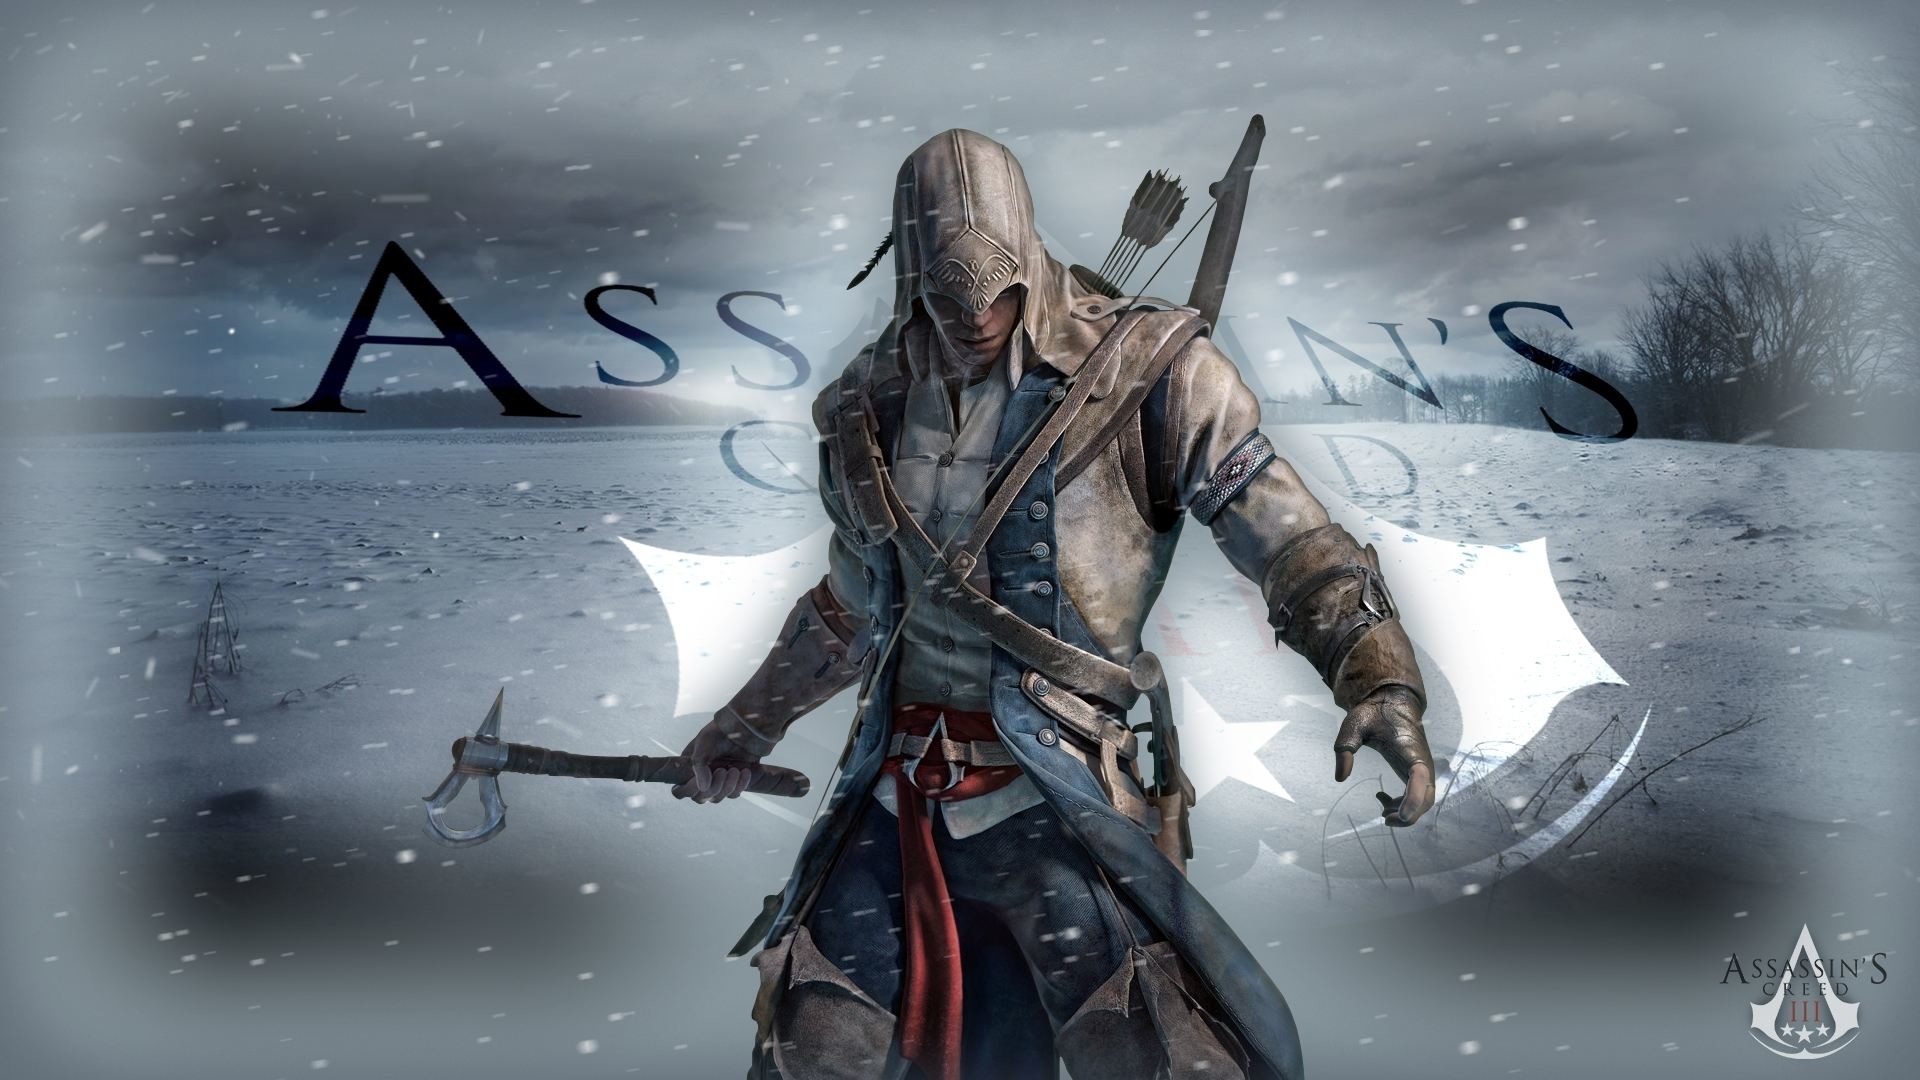 Assassin S Creed 3 Wallpaper Hd 1080p - Assassin's Creed 3 Connor ...